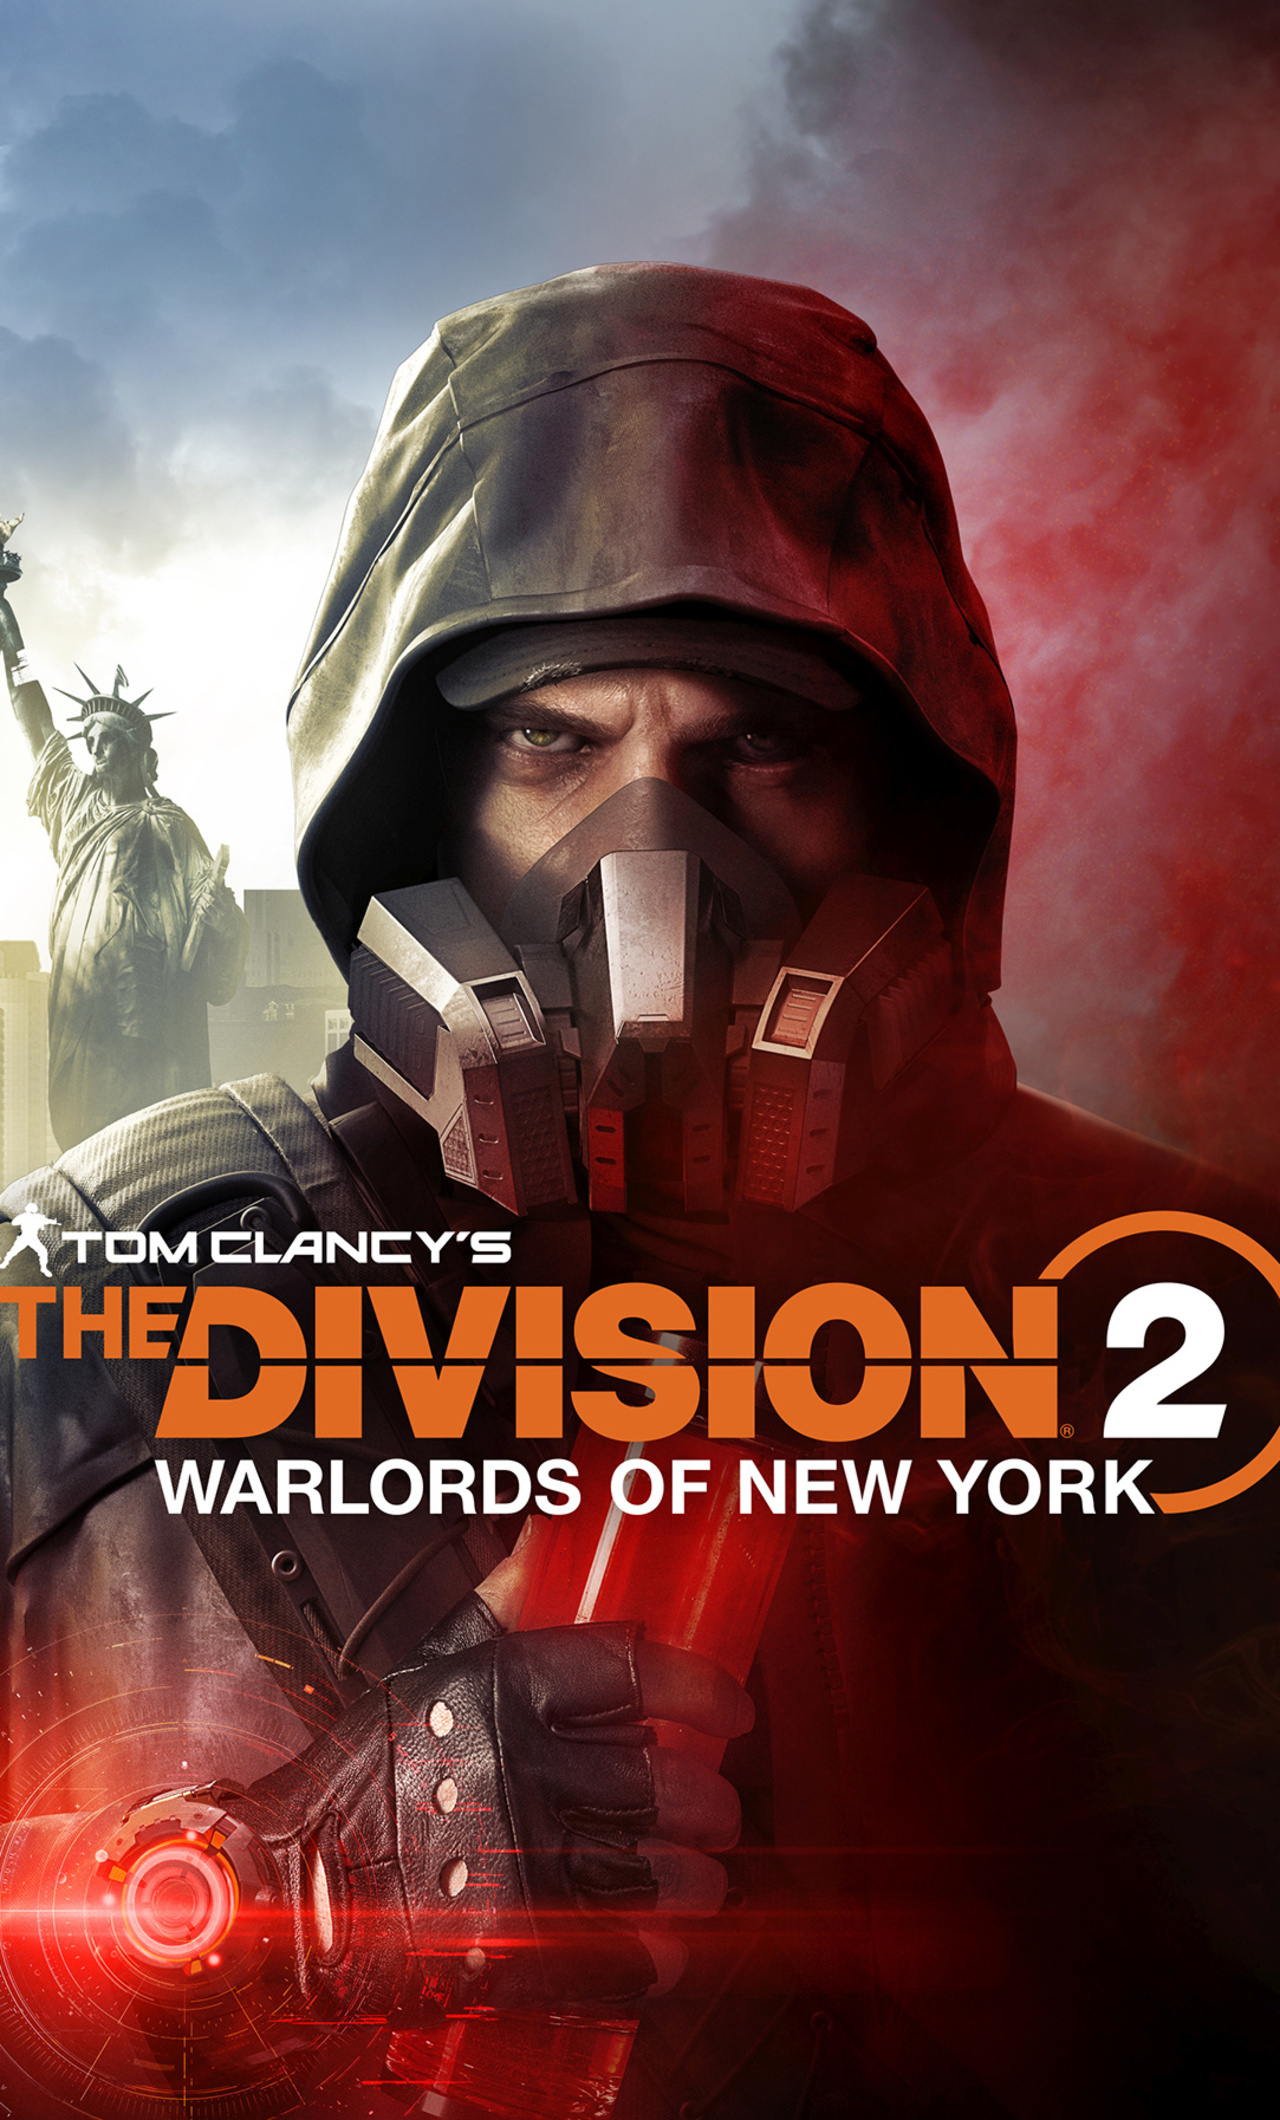 Tom Clancys The Division 2 Warlords Of New York Wallpaper In 1280x2120 Resolution